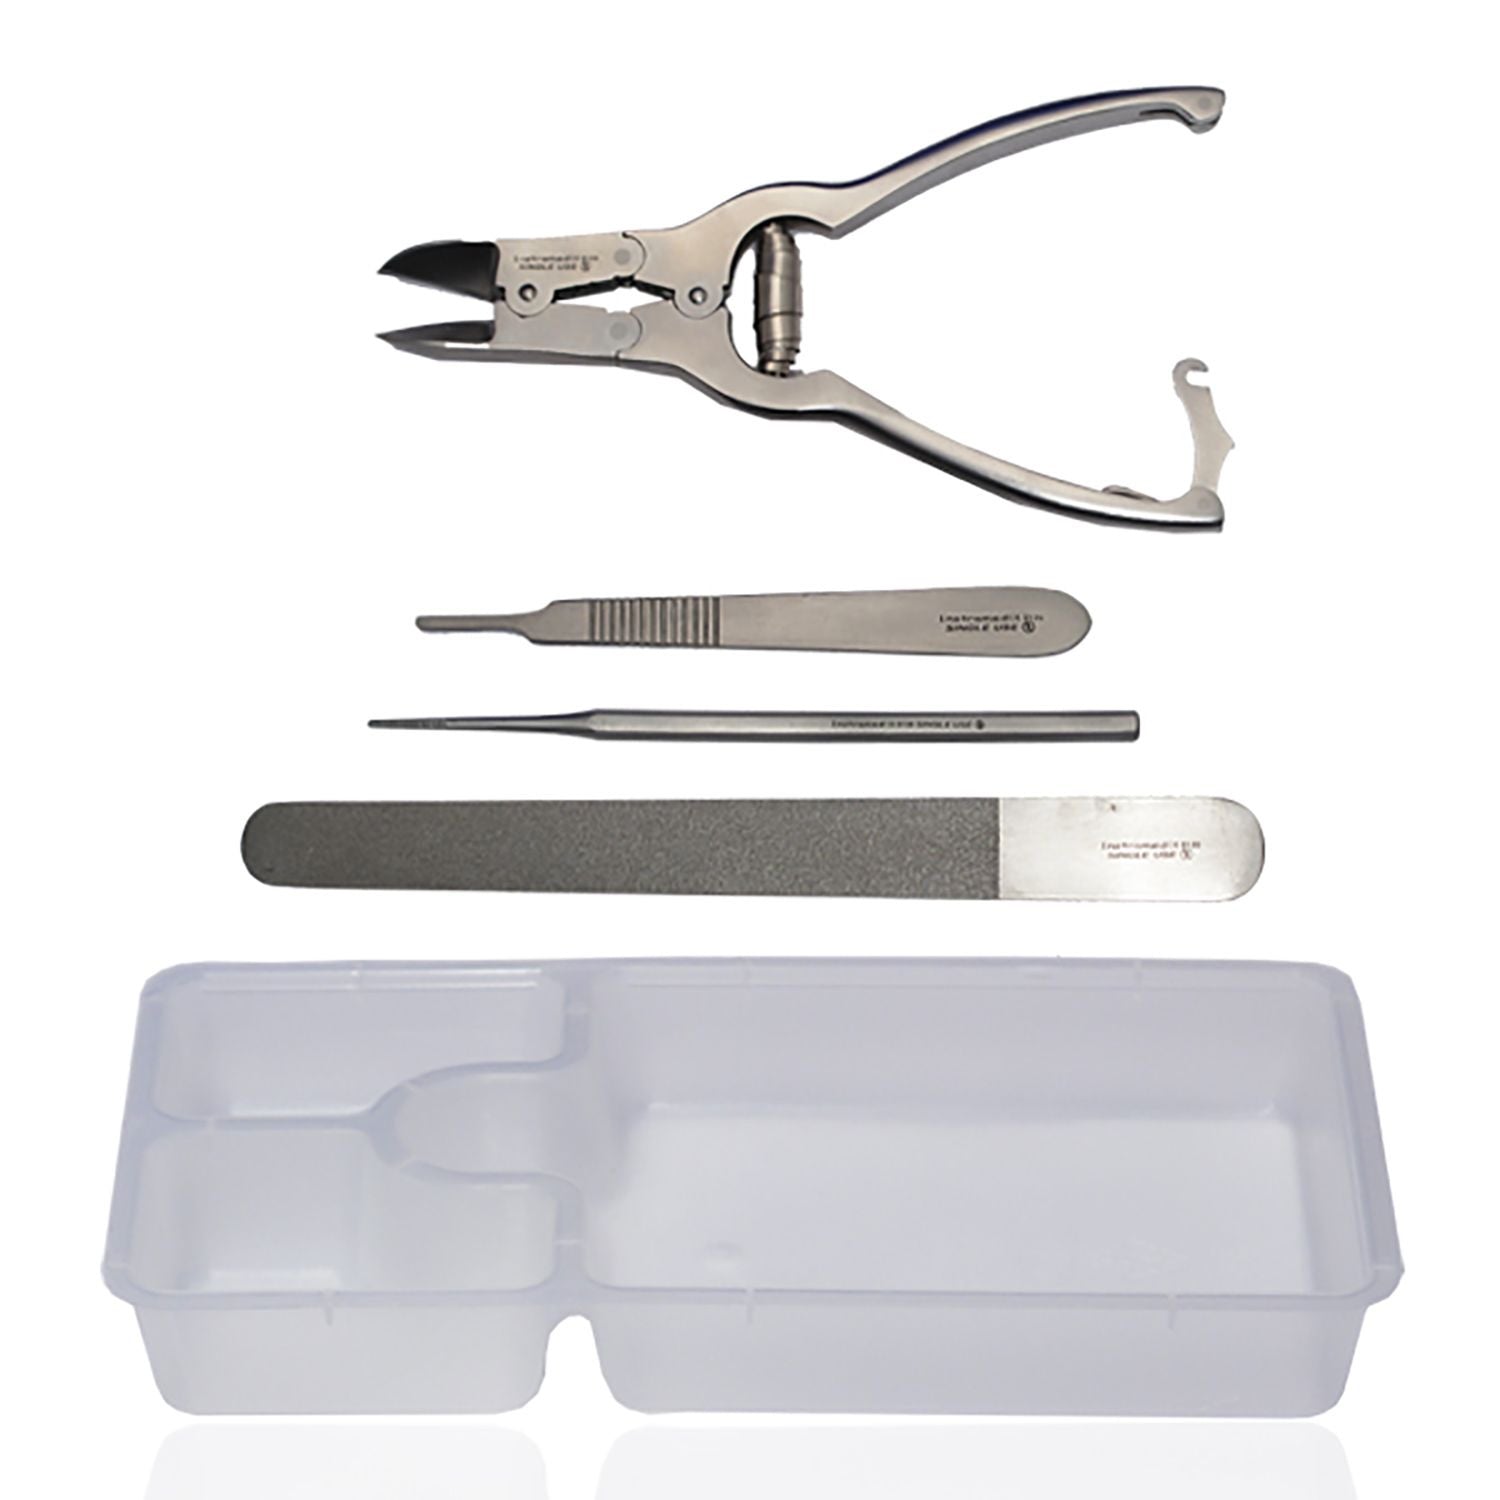 Instramed Podiatry Basic Pack | Curved Cantilever